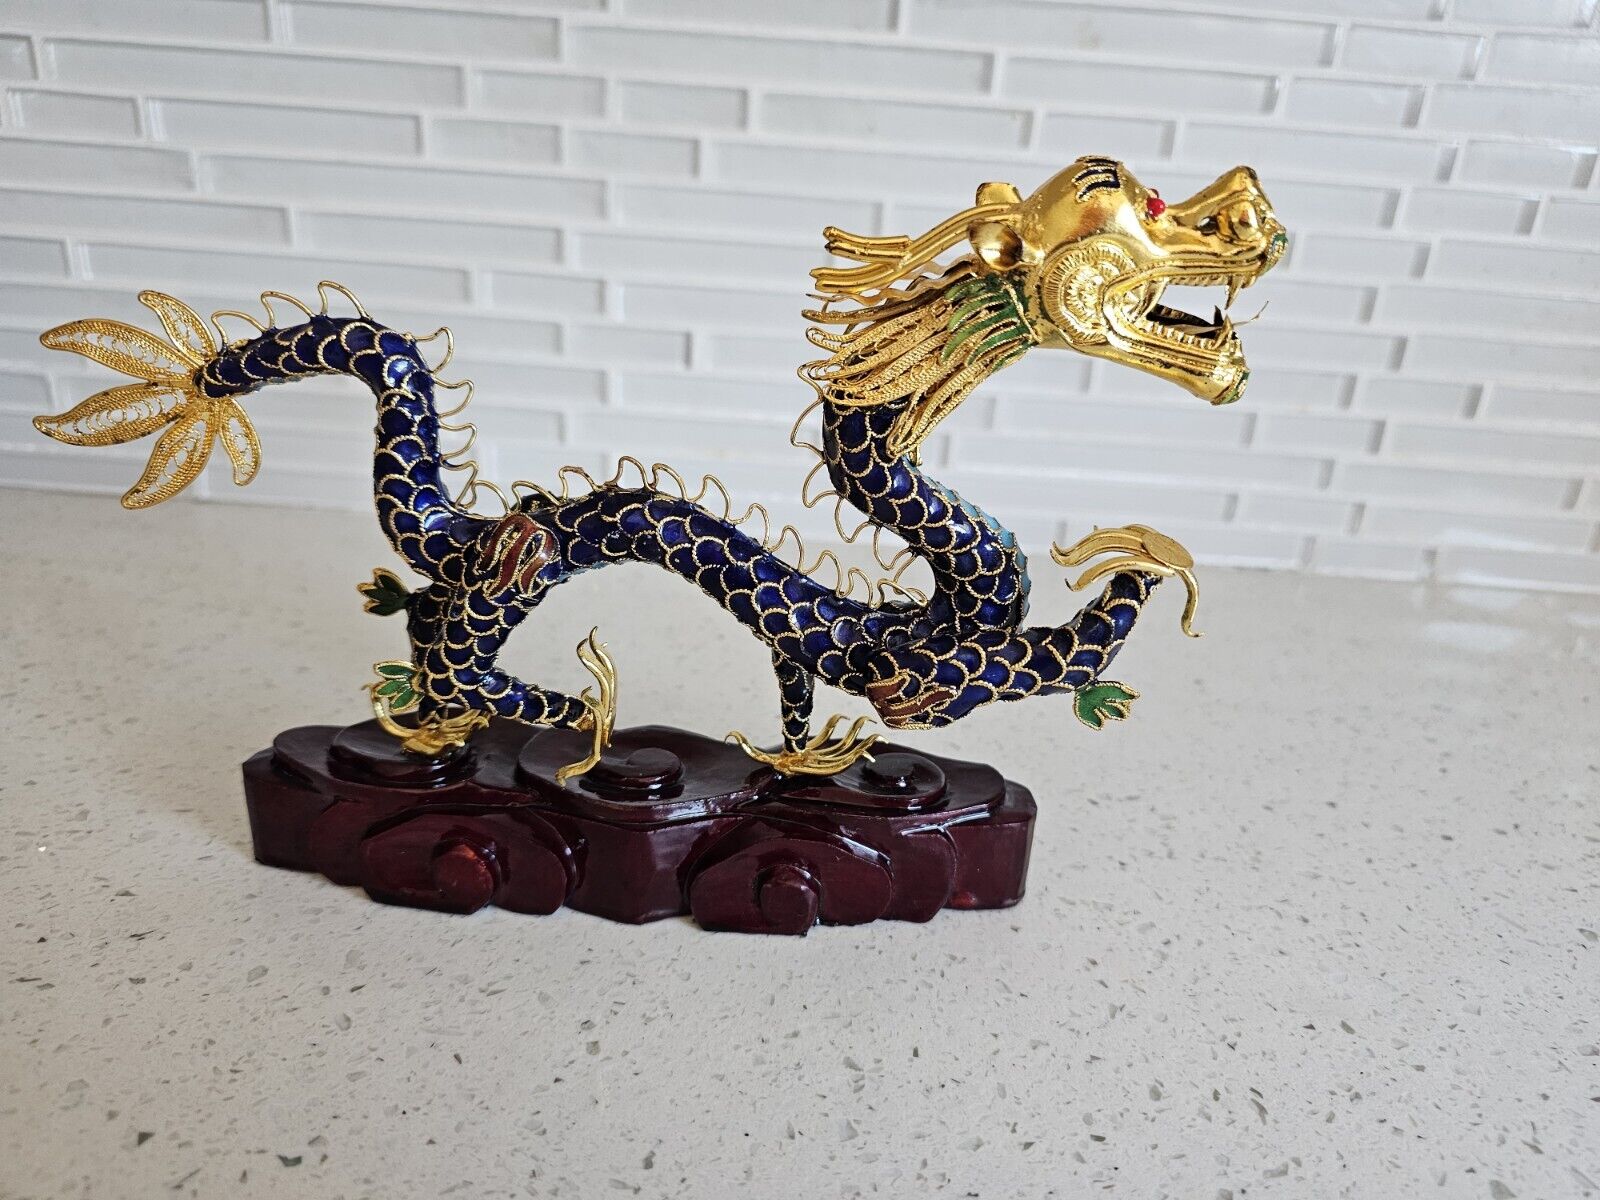 Vintage Chinese Cloisonne Dragon Figurine on stand Enamel and Gold Plated